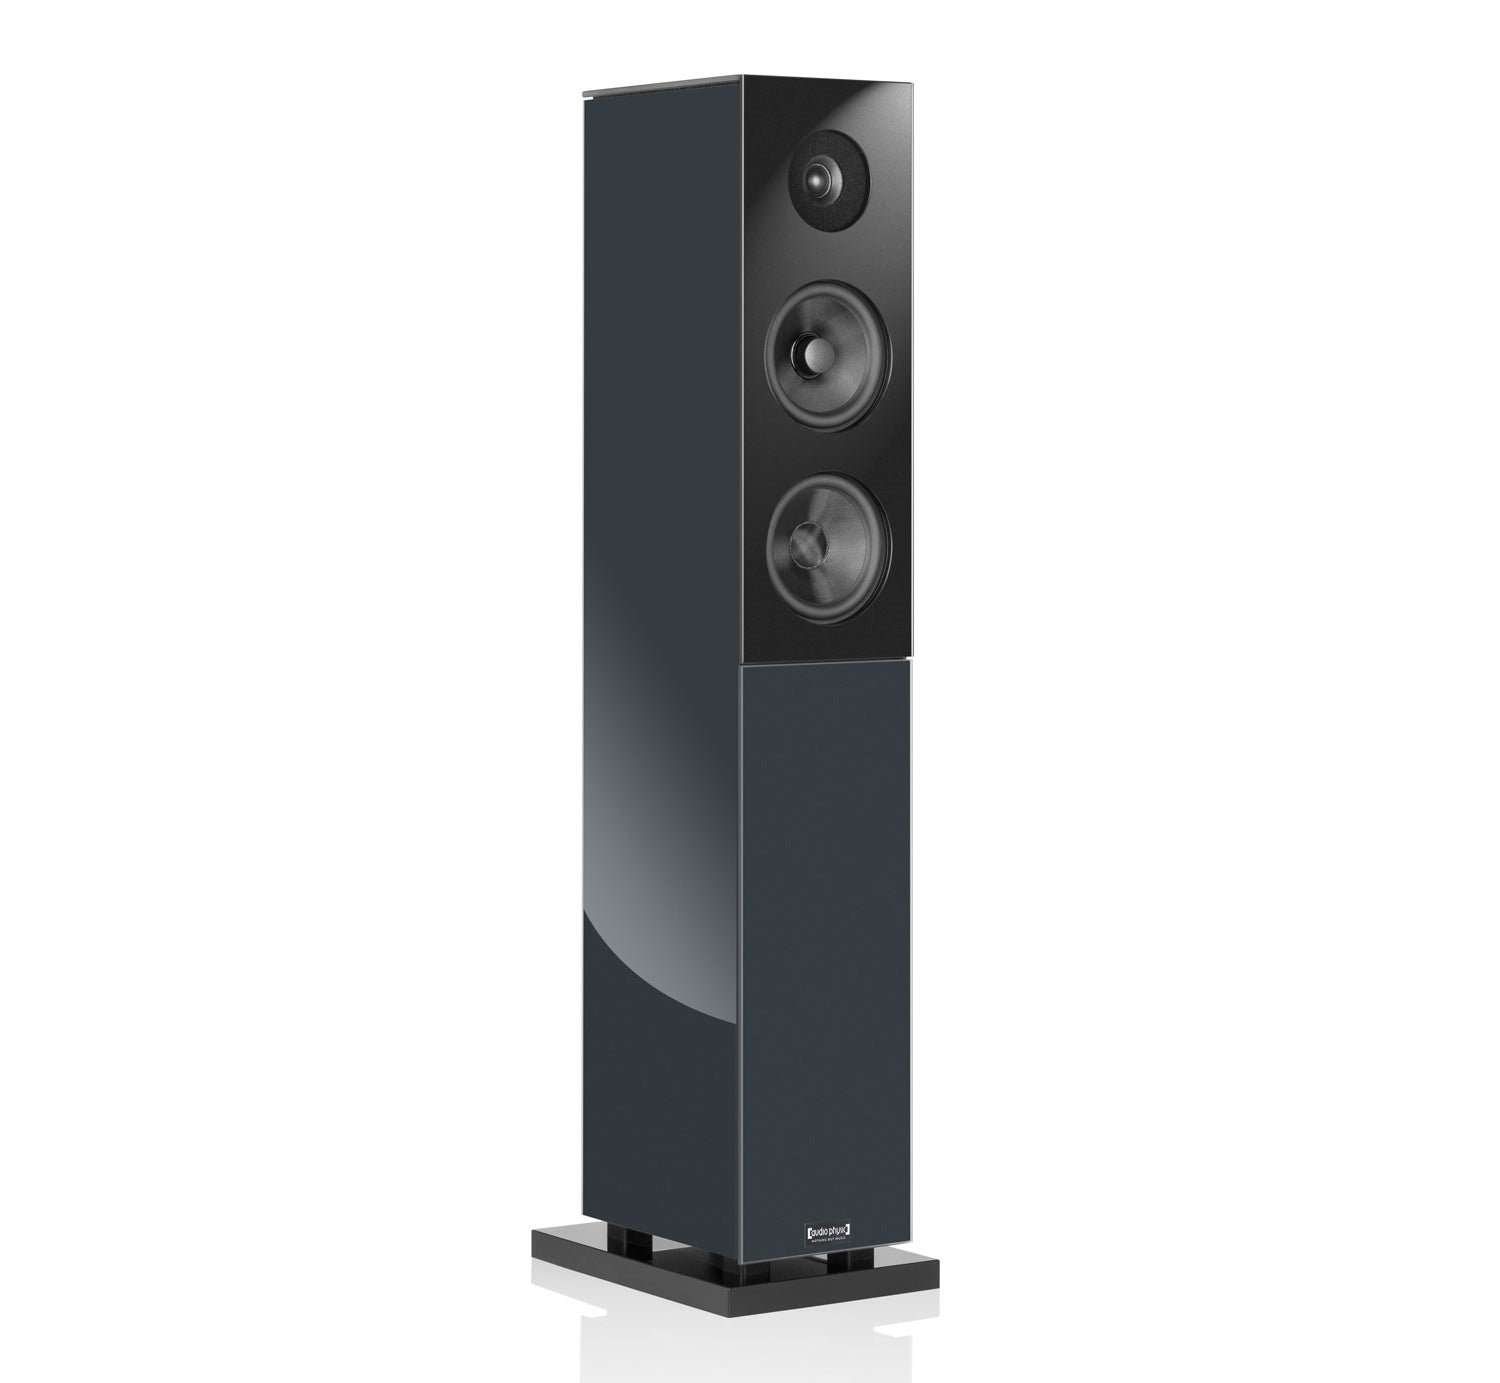 Audio Physic Classic 15 Tower Speakers